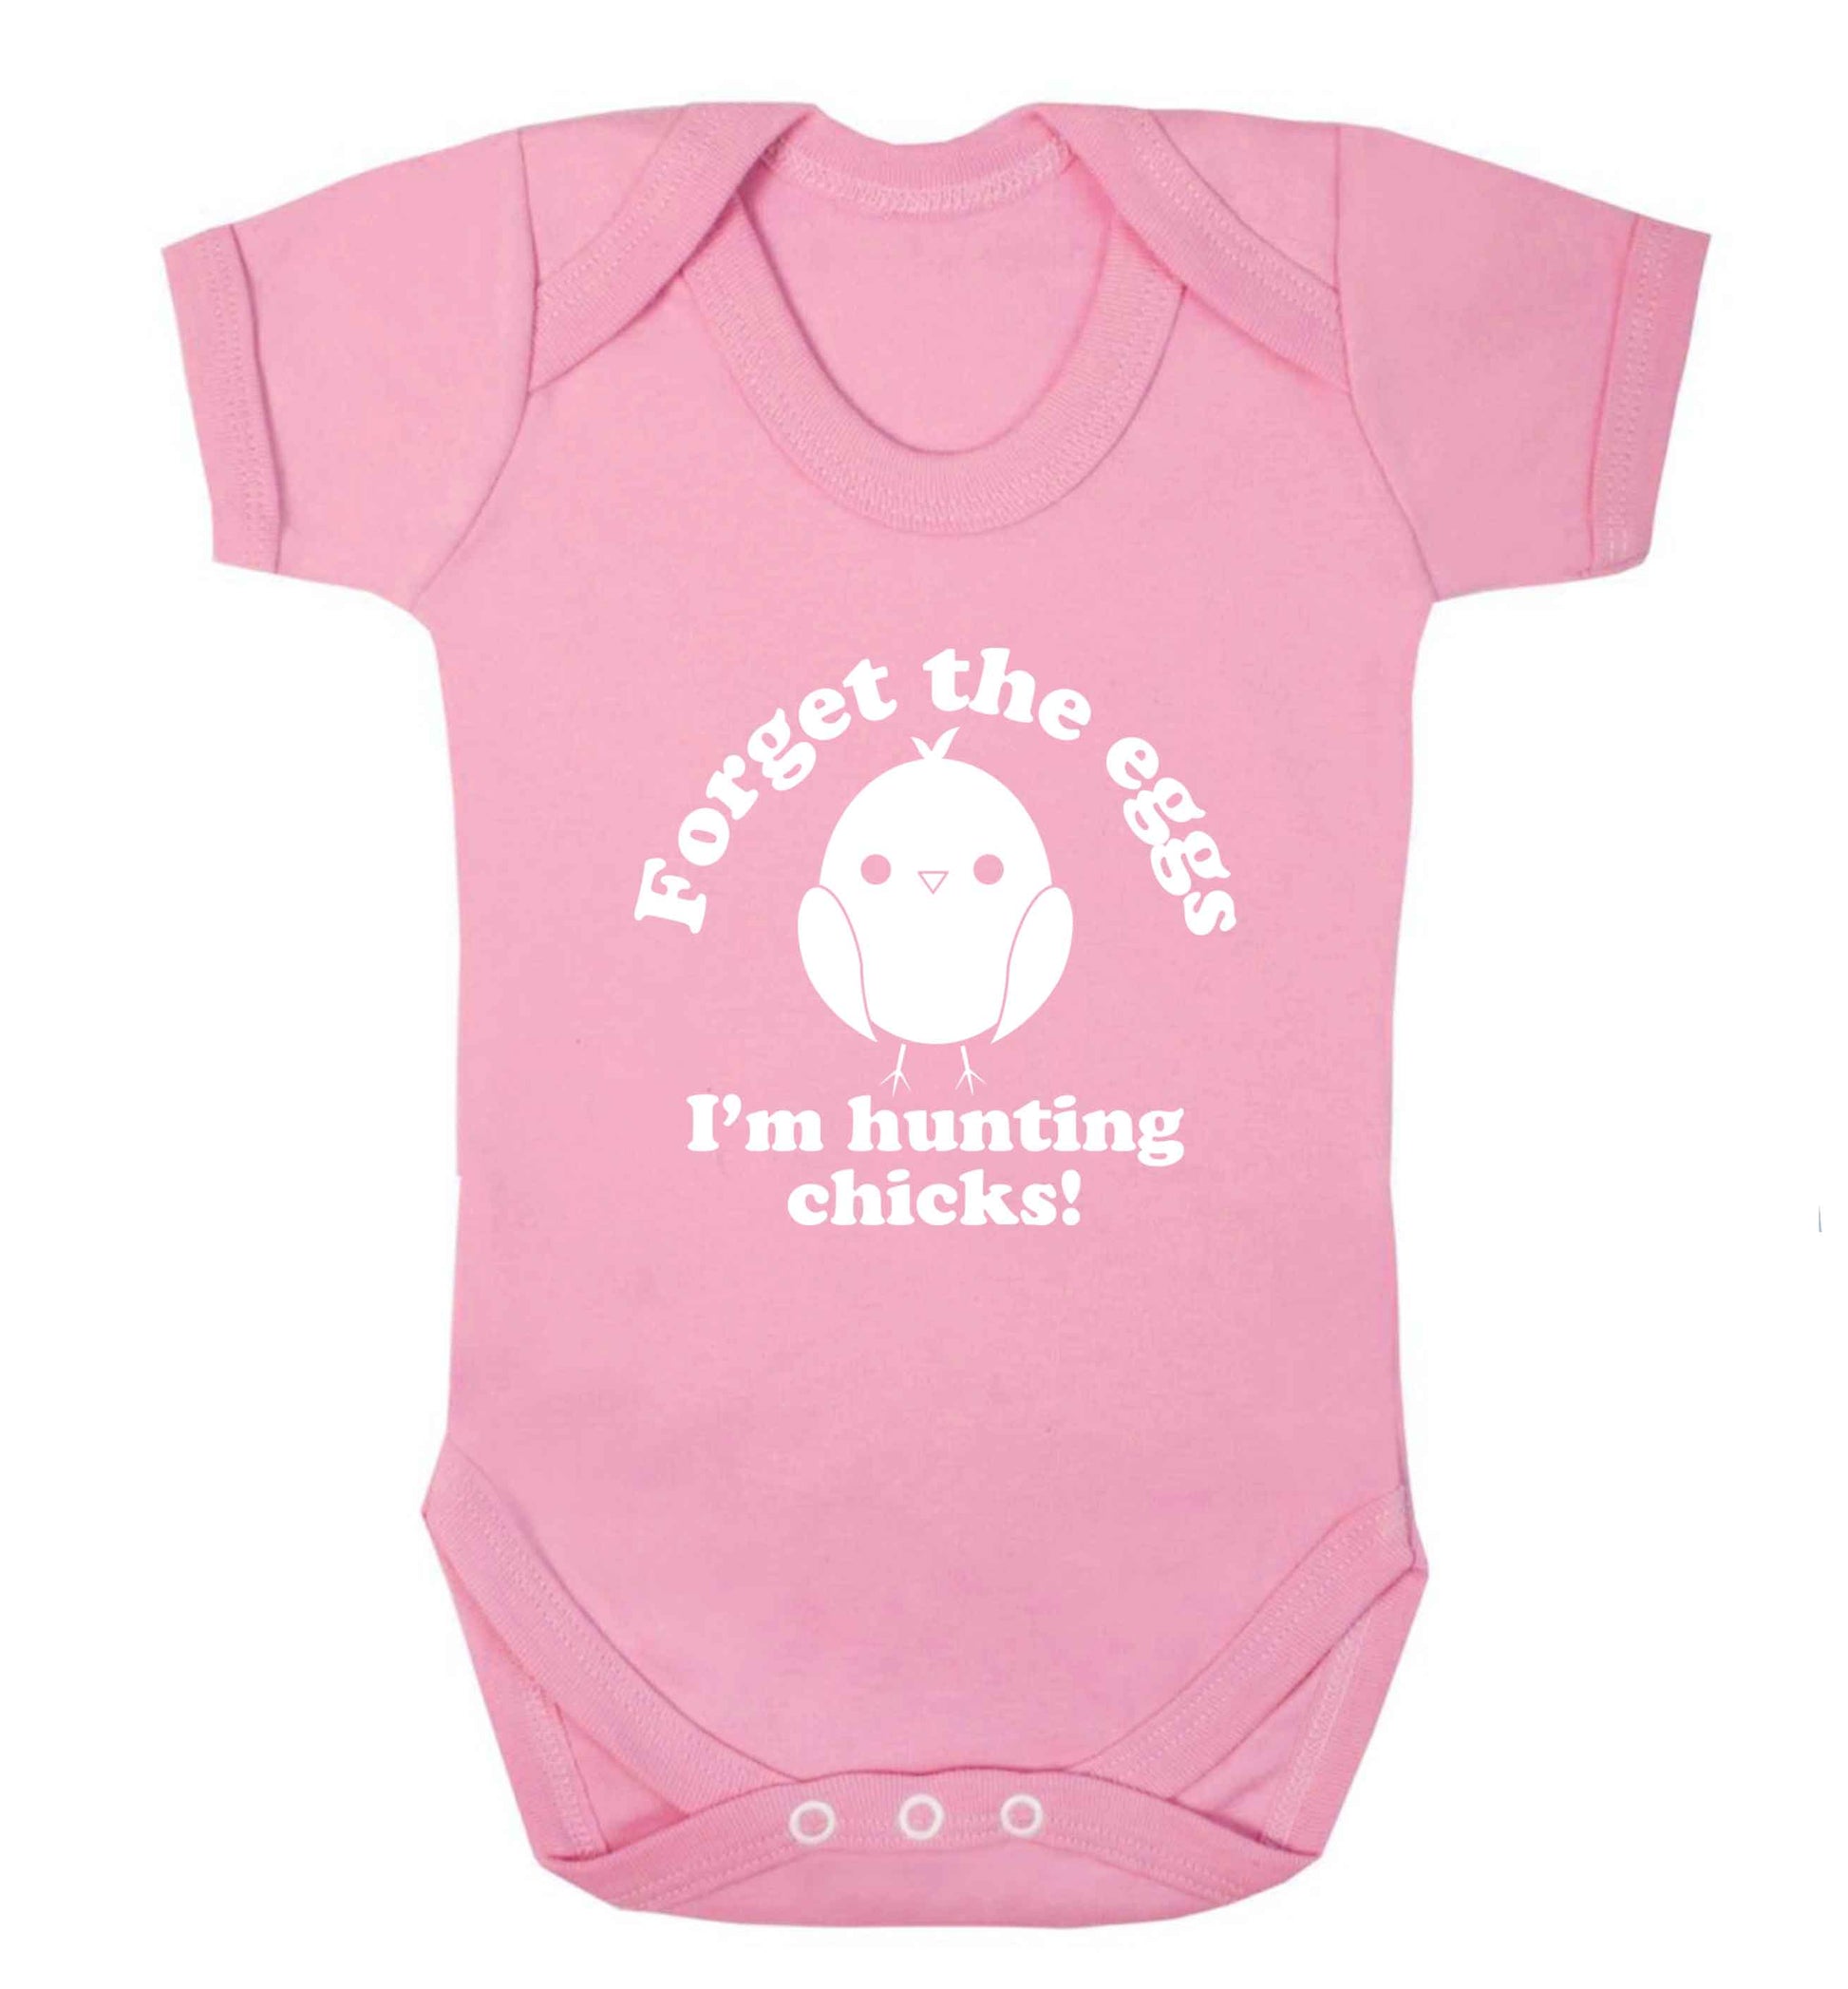 Forget the eggs I'm hunting chicks! baby vest pale pink 18-24 months